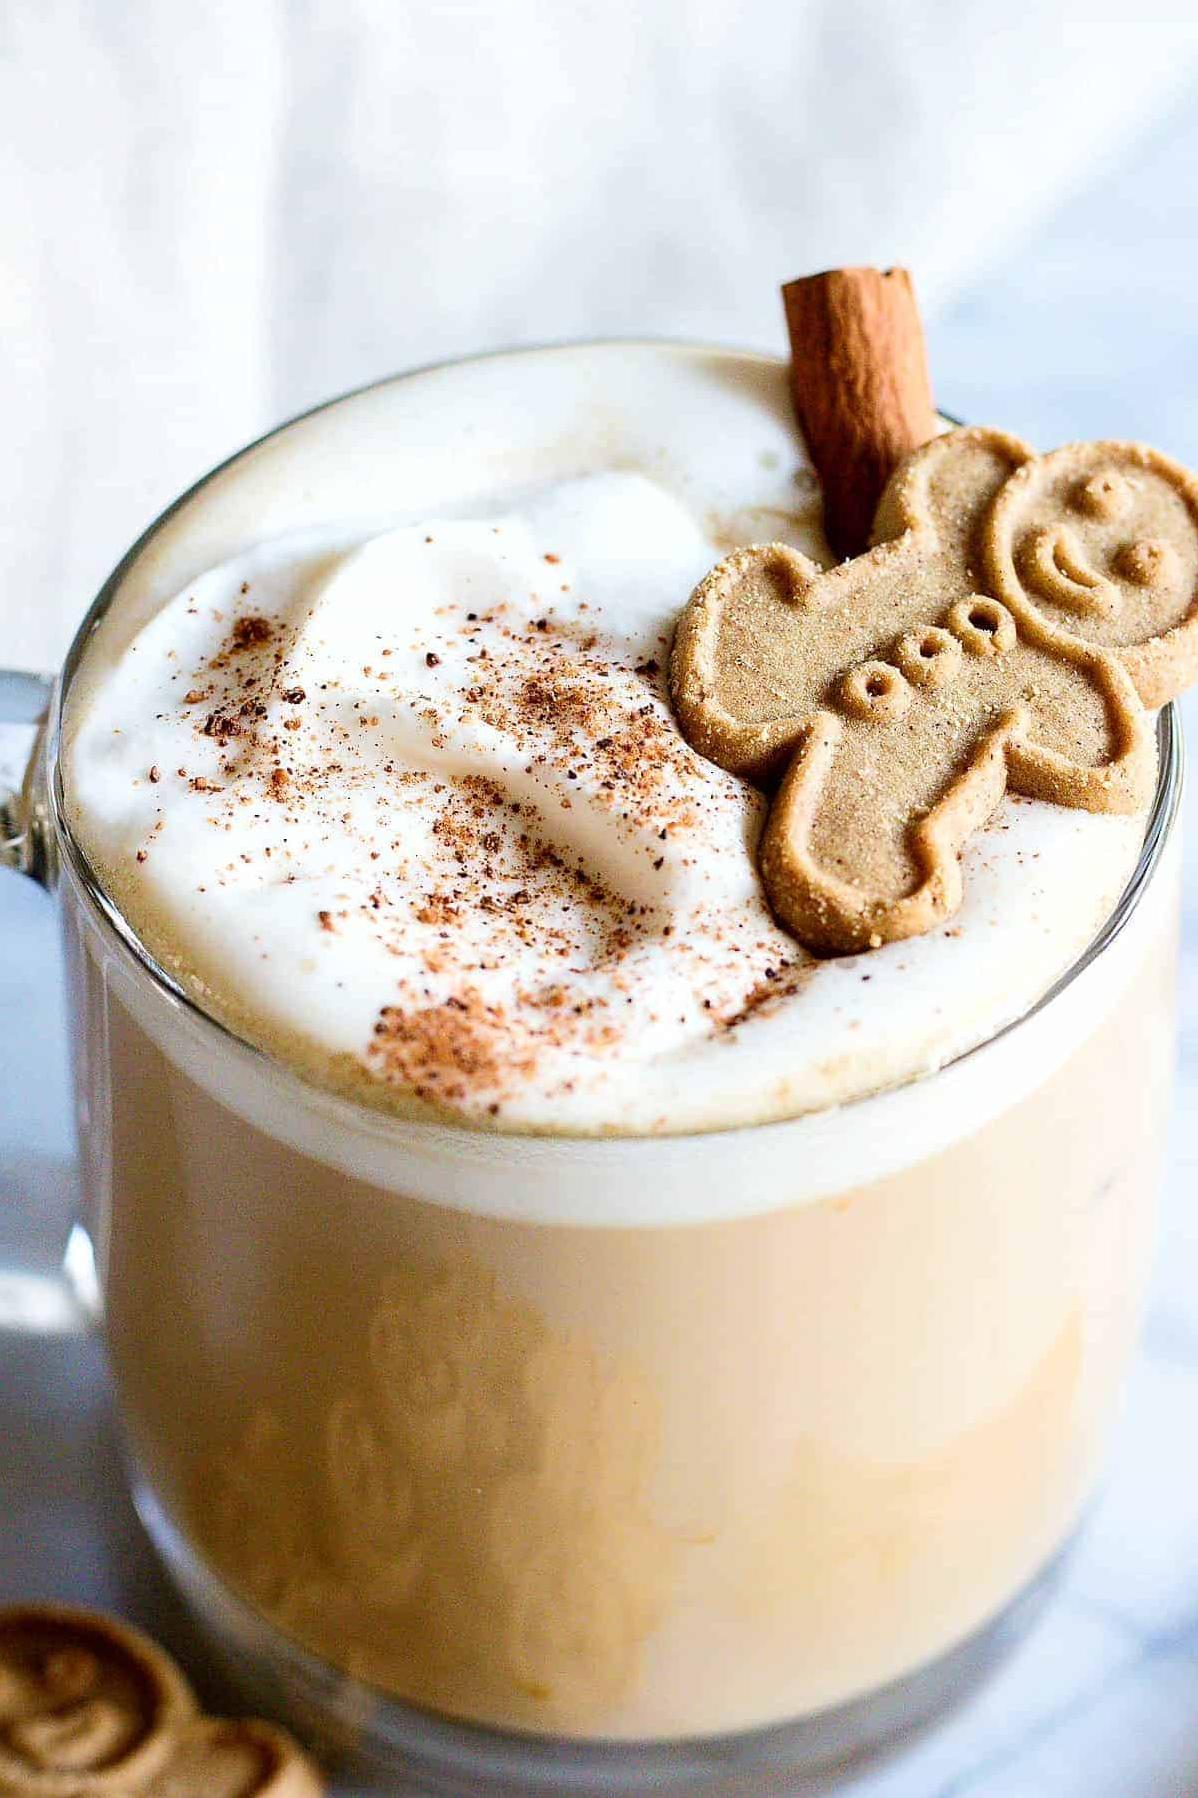  Gather your friends and family and make a batch of coffee eggnog for the holidays